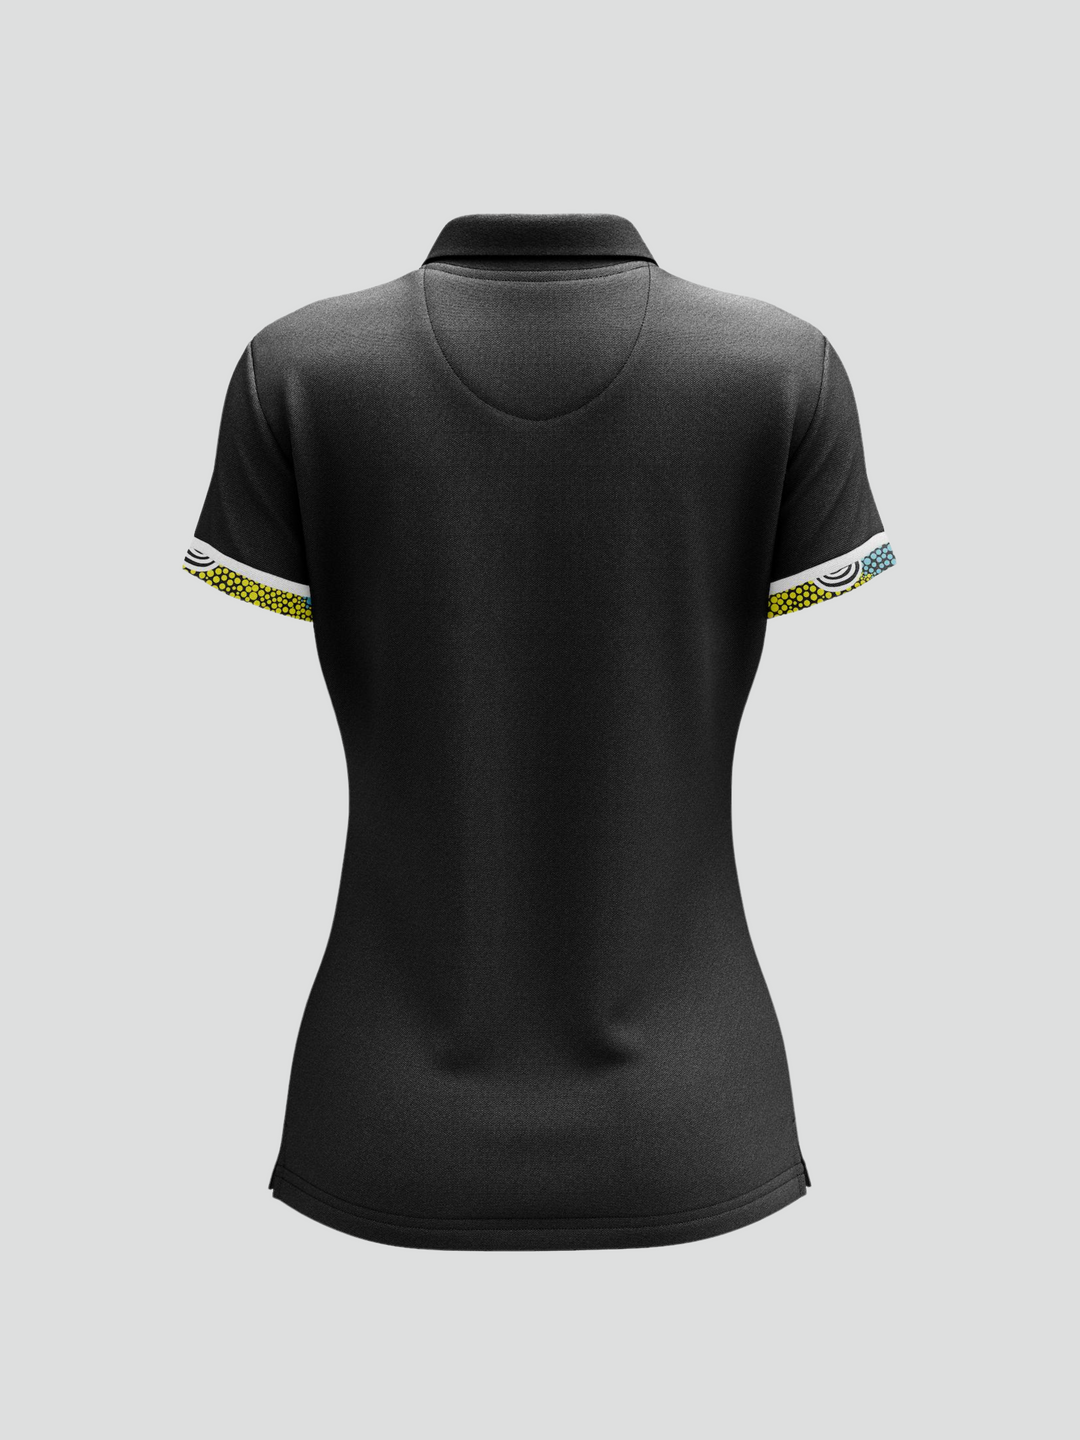 Show Up - Women's Corporate Polo